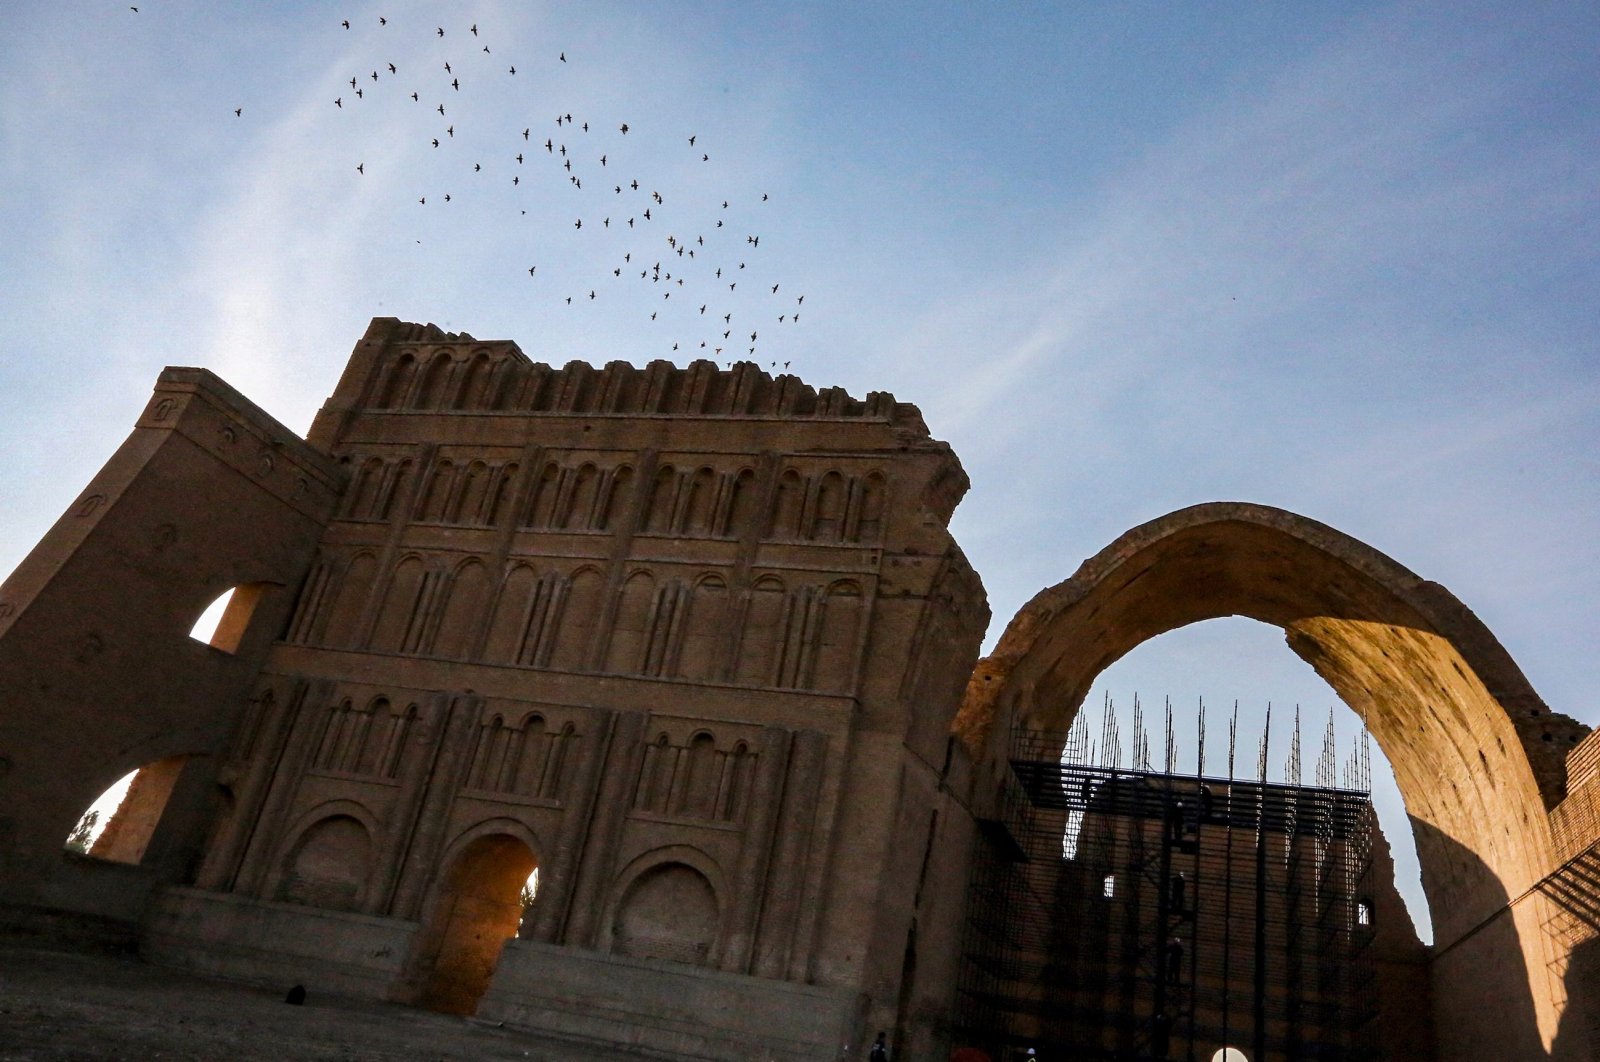 Birds fly over scaffolding at the Arch of Ctesiphon, also known as Taq Kisra (Khosrow&#039;s Arch), at the ancient site of Ctesiphon near al-Madain, central Iraq, Nov. 24, 2021. (AFP Photo)